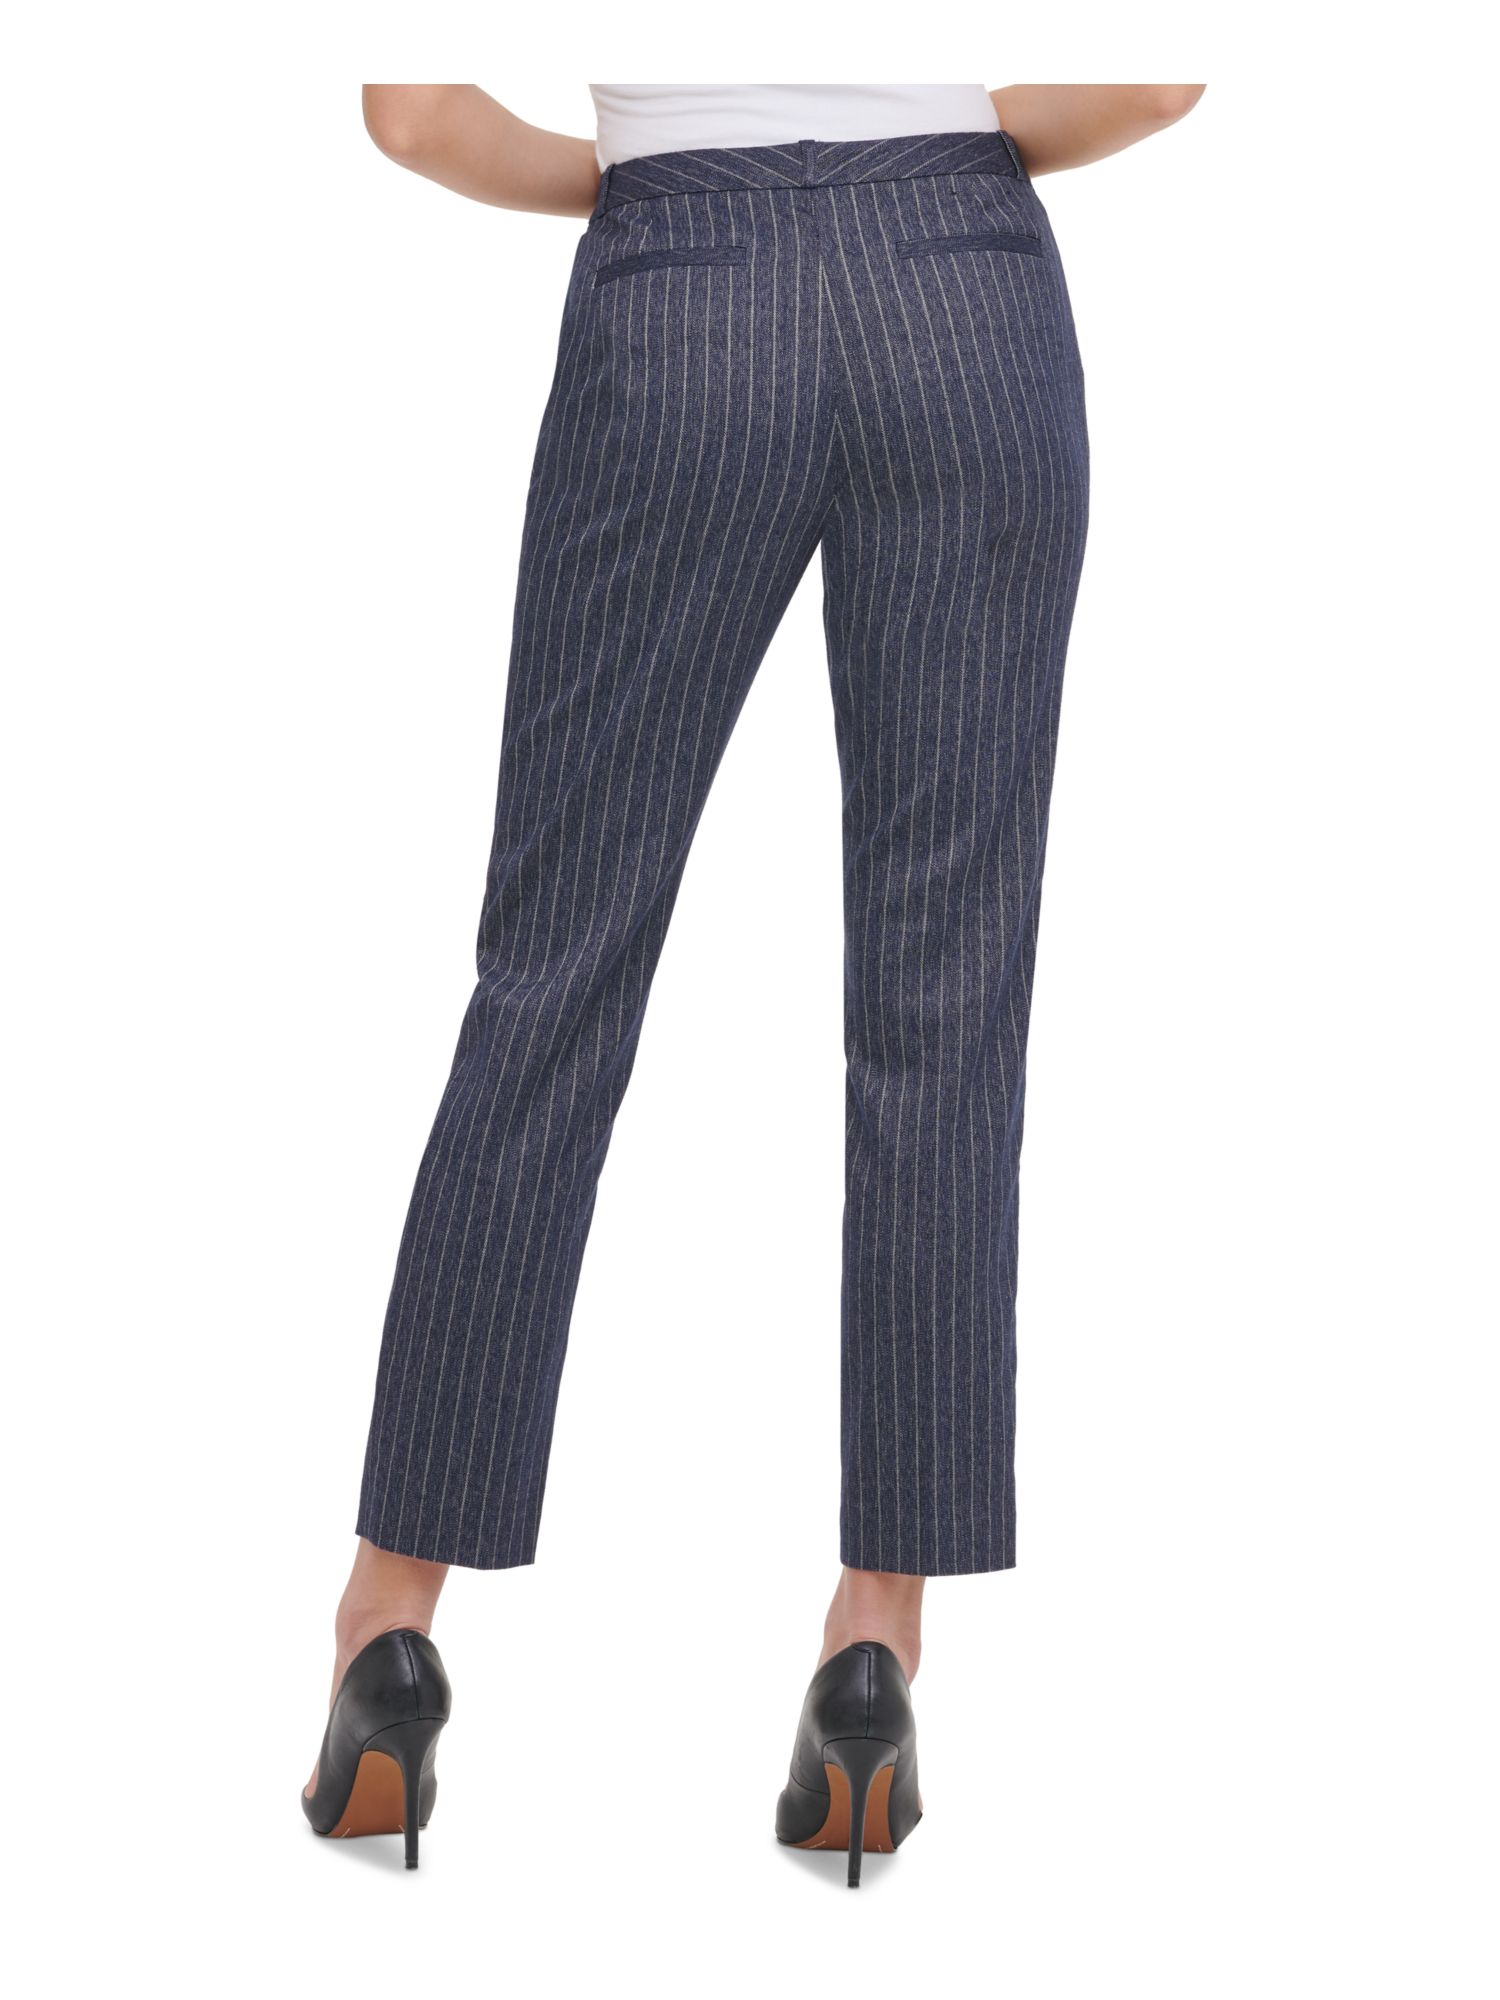 TOMMY HILFIGER Womens Navy Zippered Ankle Pinstripe Wear To Work Straight leg Pants 8 - image 2 of 2